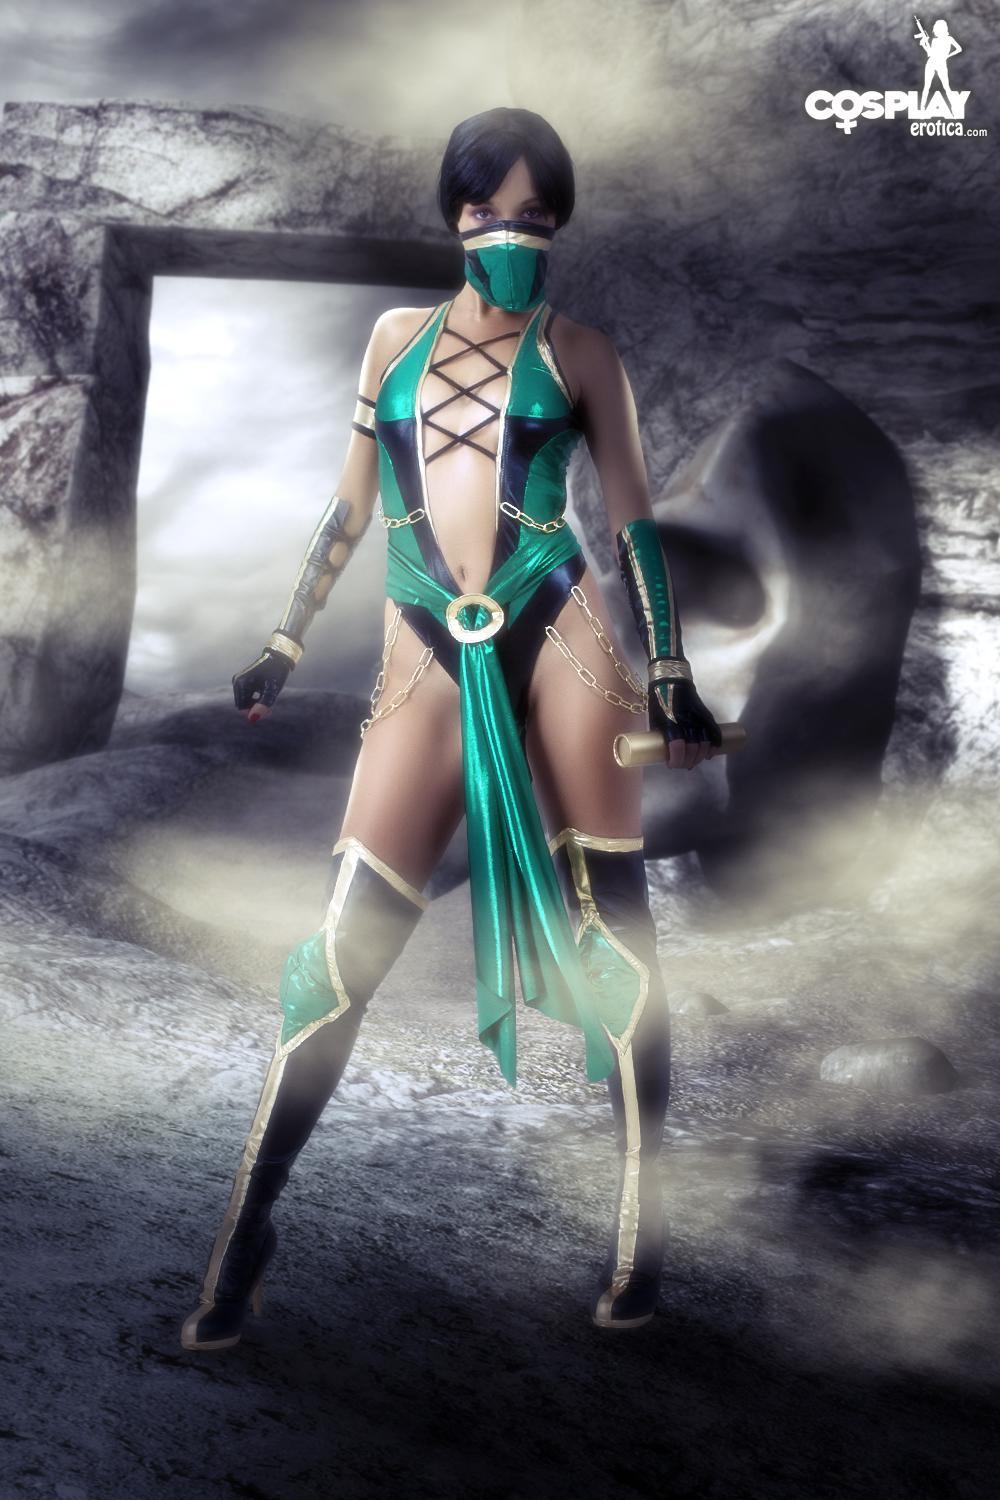 Cosplay babe Brownie dresses as a super hot Jade from Mortal Kombat #53563279